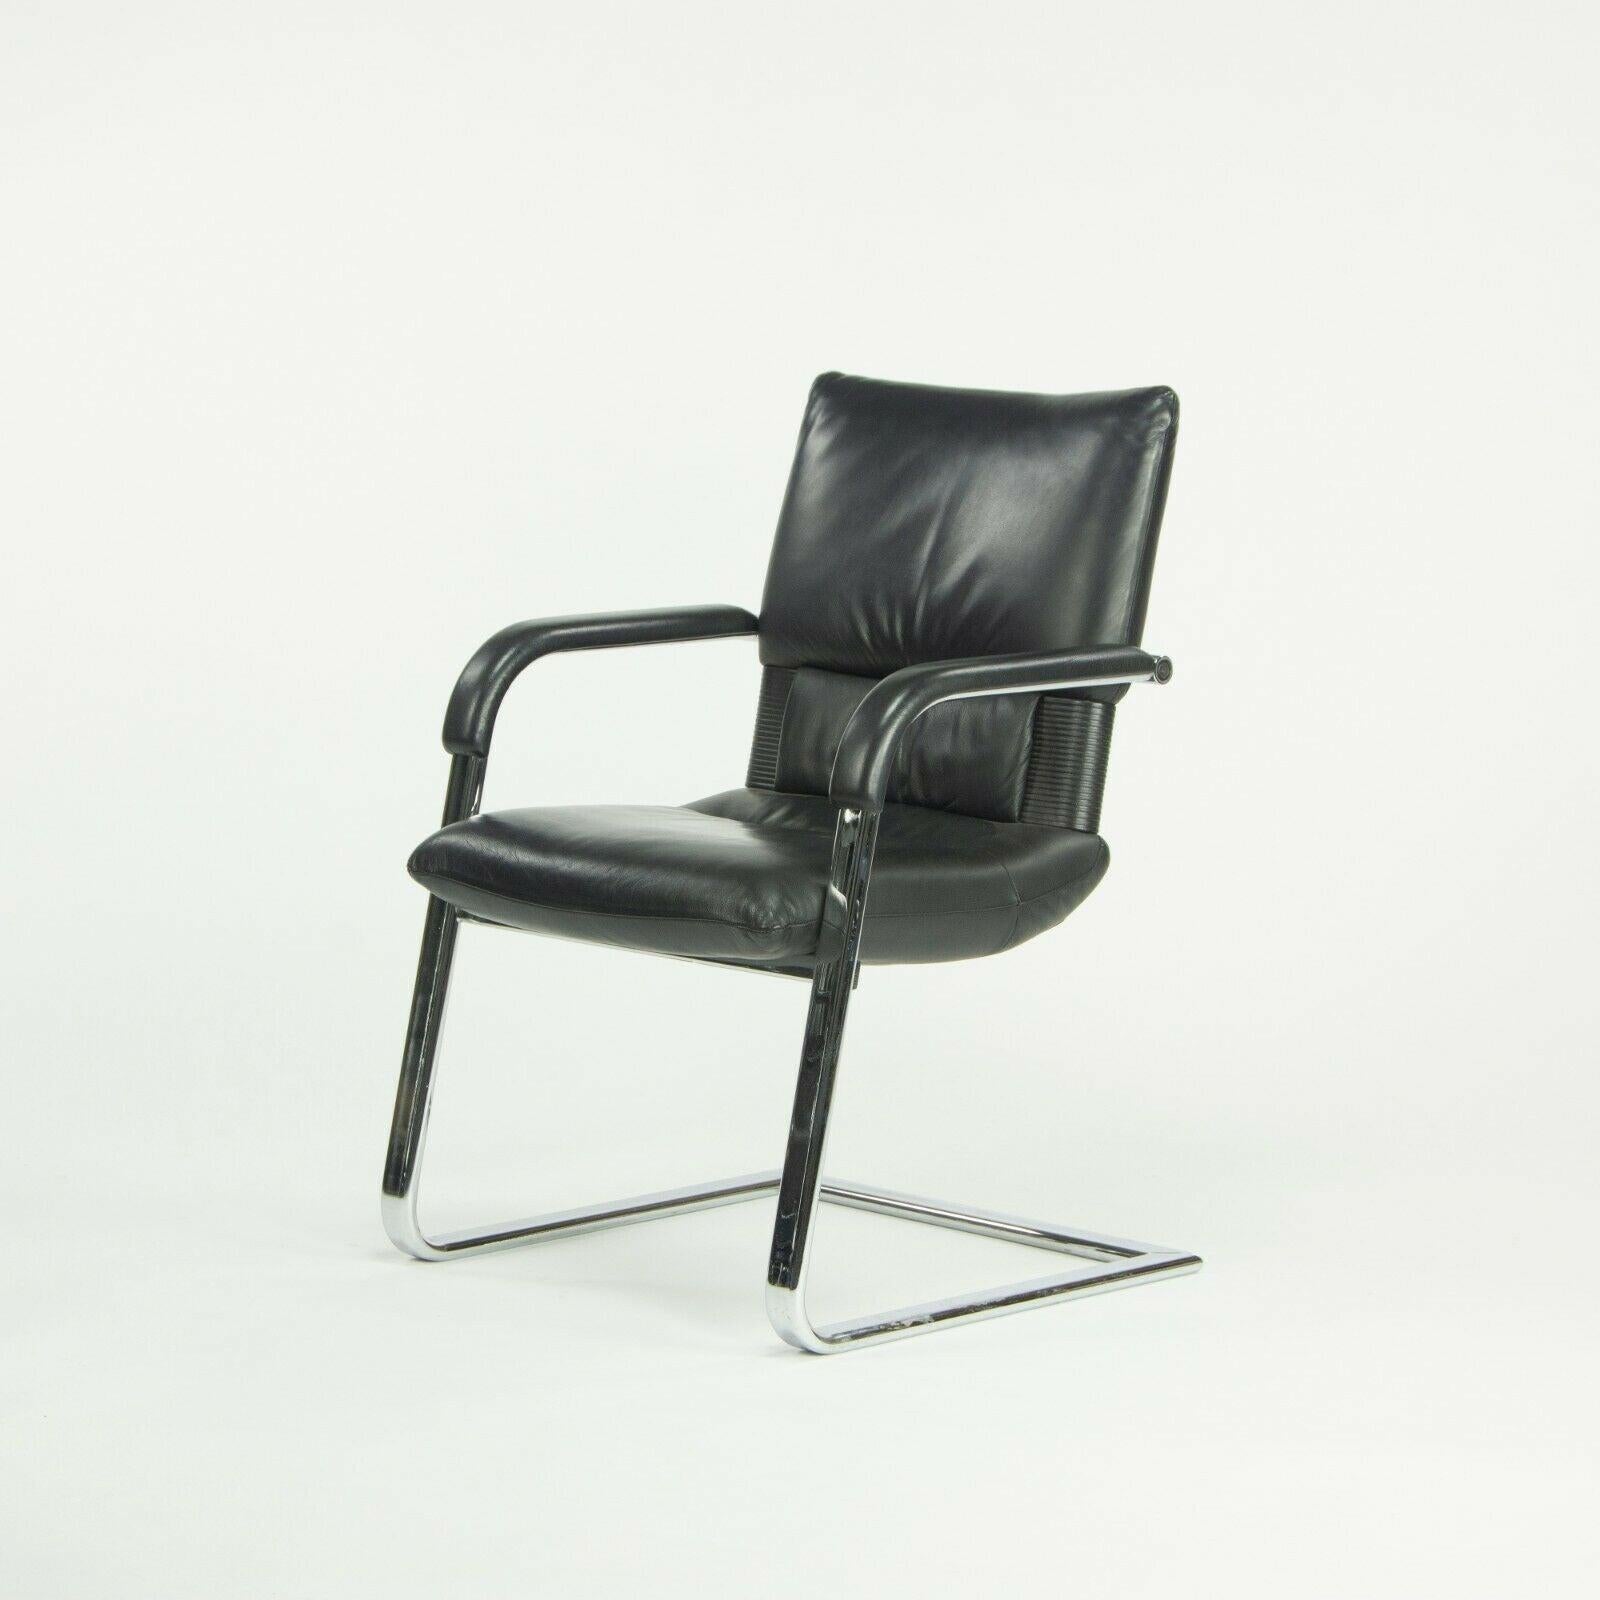 Pair of 1986 Mario Bellini for Vitra Figura Imago Arm Chairs in Black Leather For Sale 1